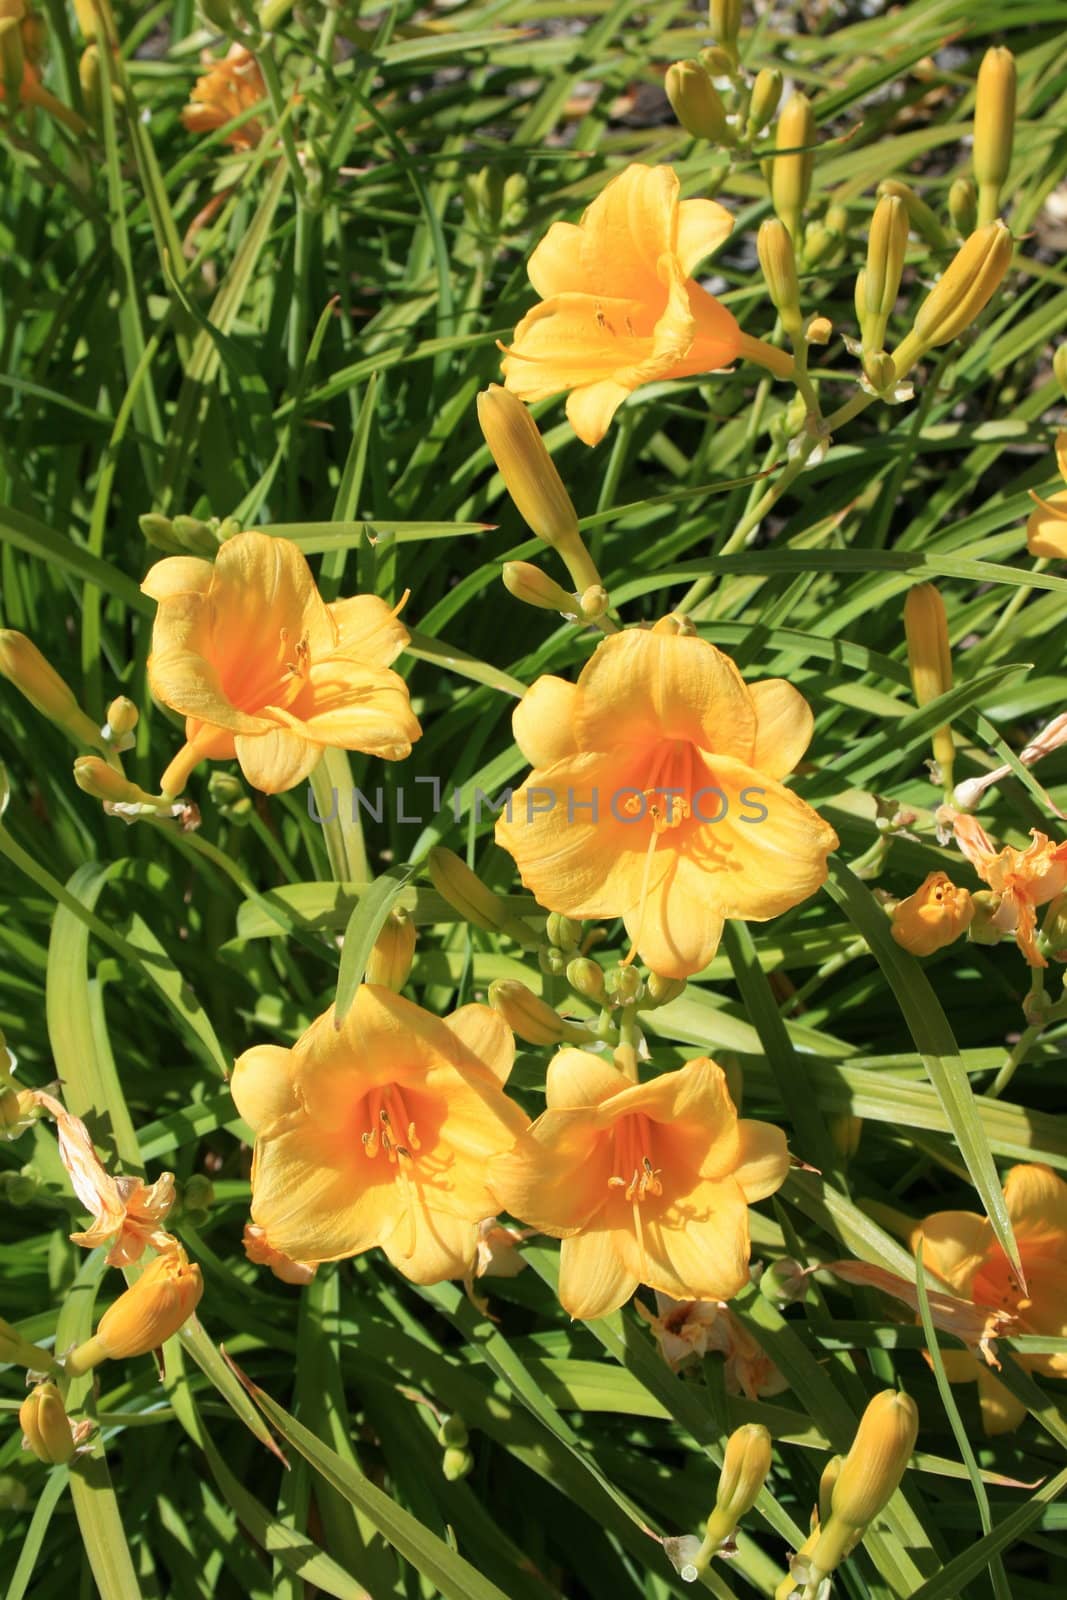 Close up of the yellow daylily flowers.
